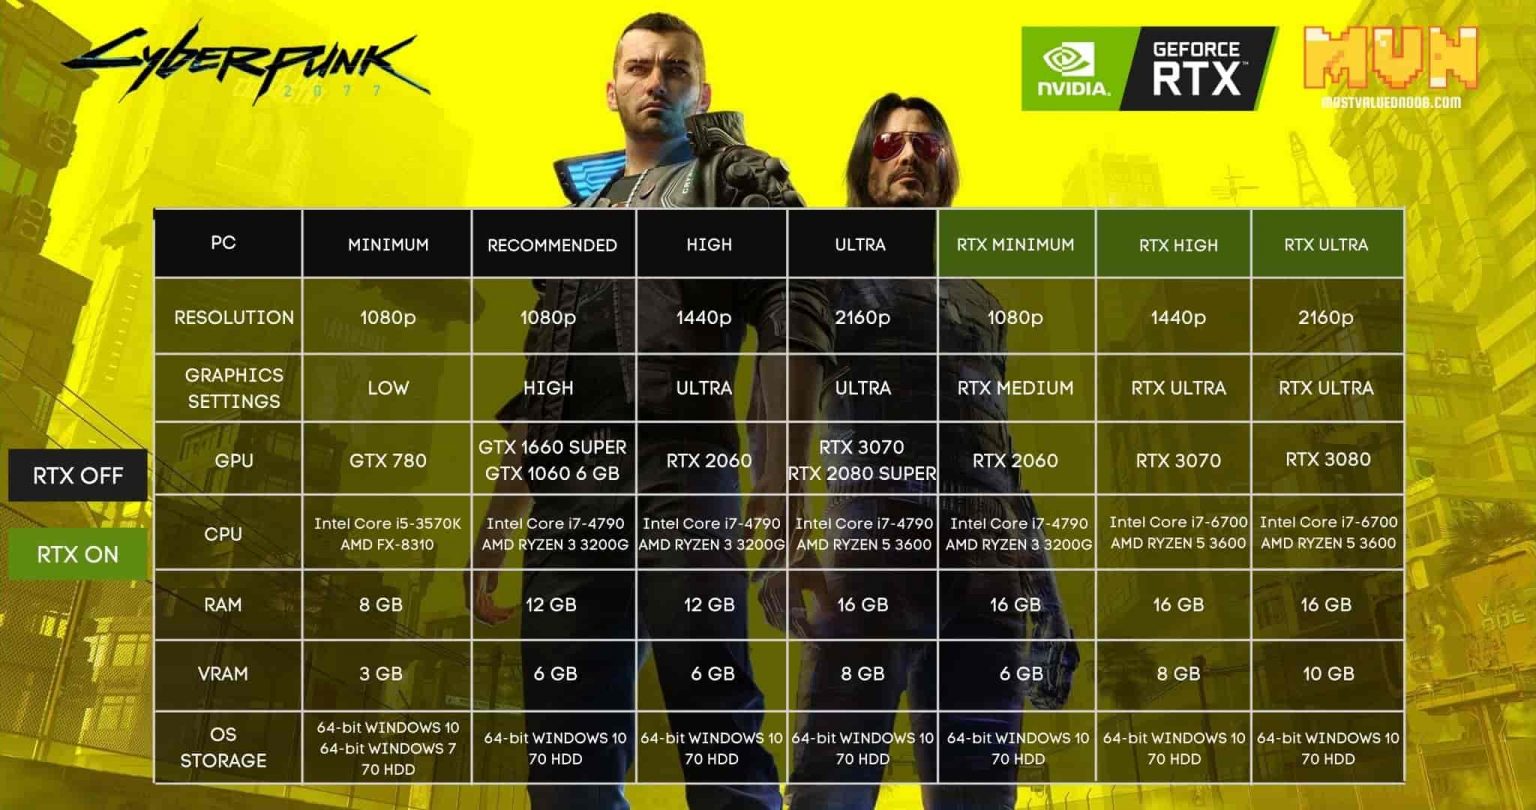 Cyberpunk 2077 System Requirements Can You Run It?